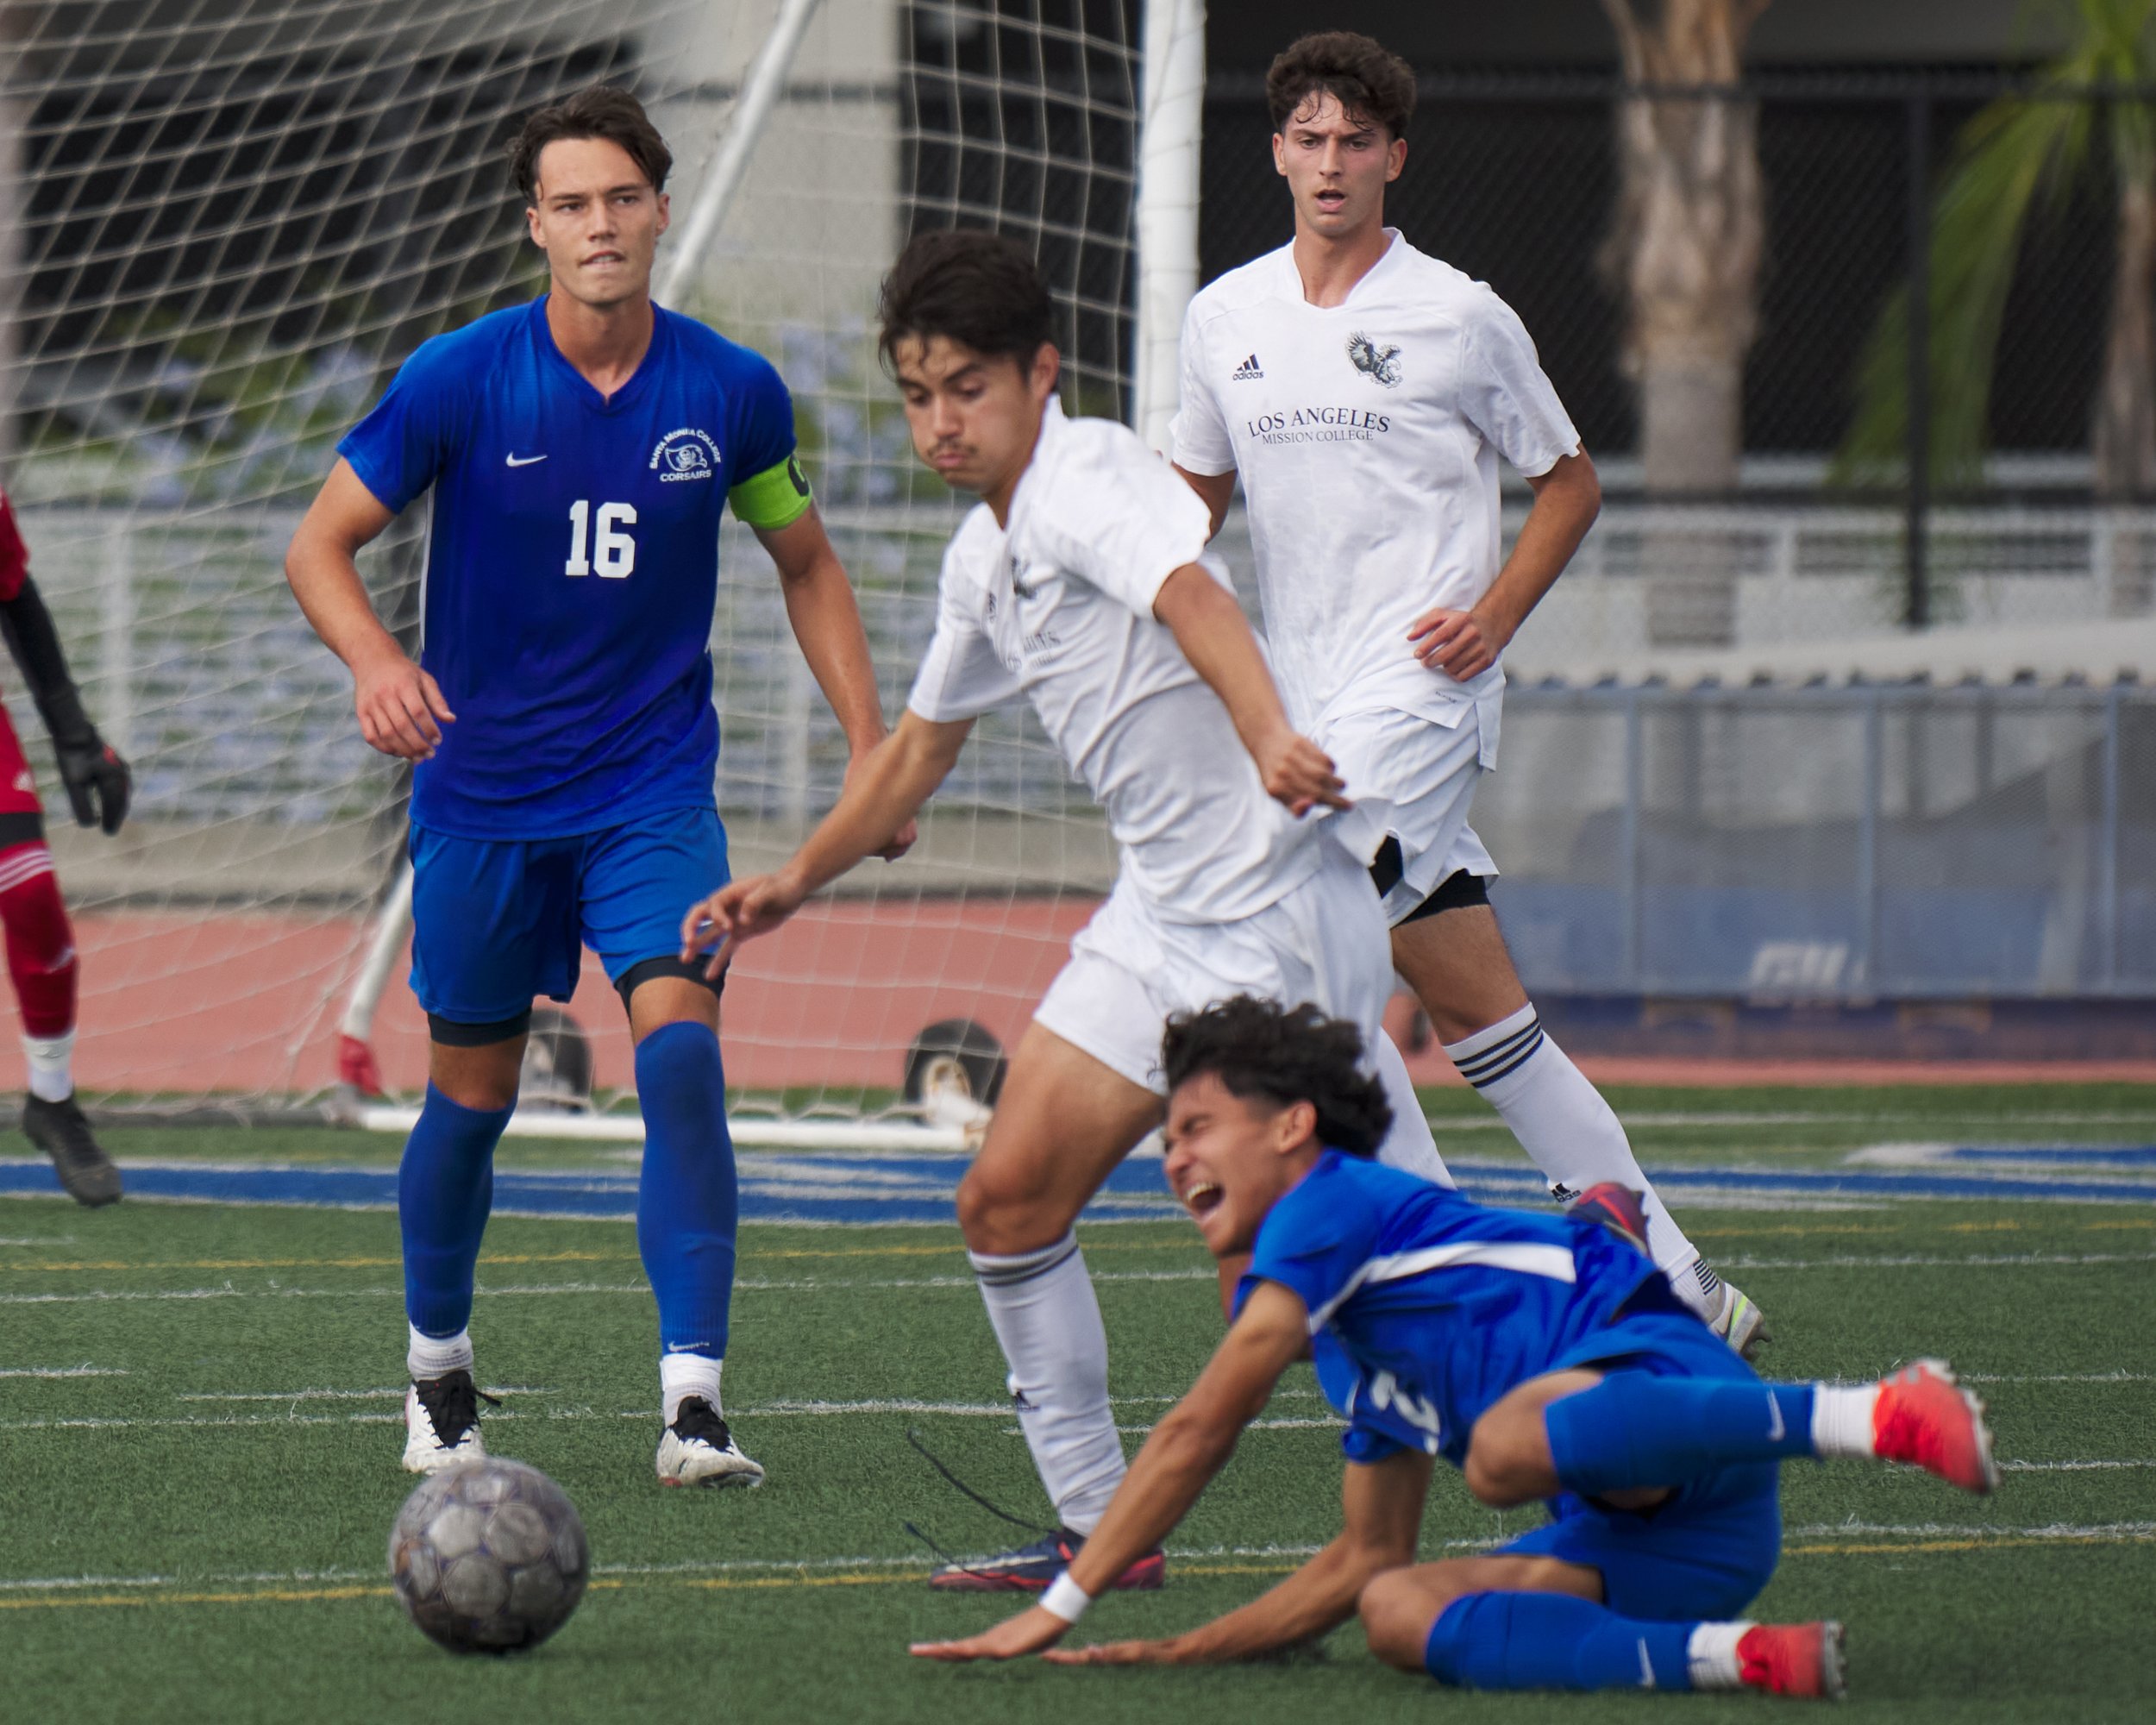  Los Angeles Mission College Eagles' Dominic Salazar (center) earned a red card for this foul against Santa Monica College Corsairs' Jason Moreno (bottom) during the men's soccer match, pictured with Kyler Sorber (left) and Yahav Arviv (rear) on Tues